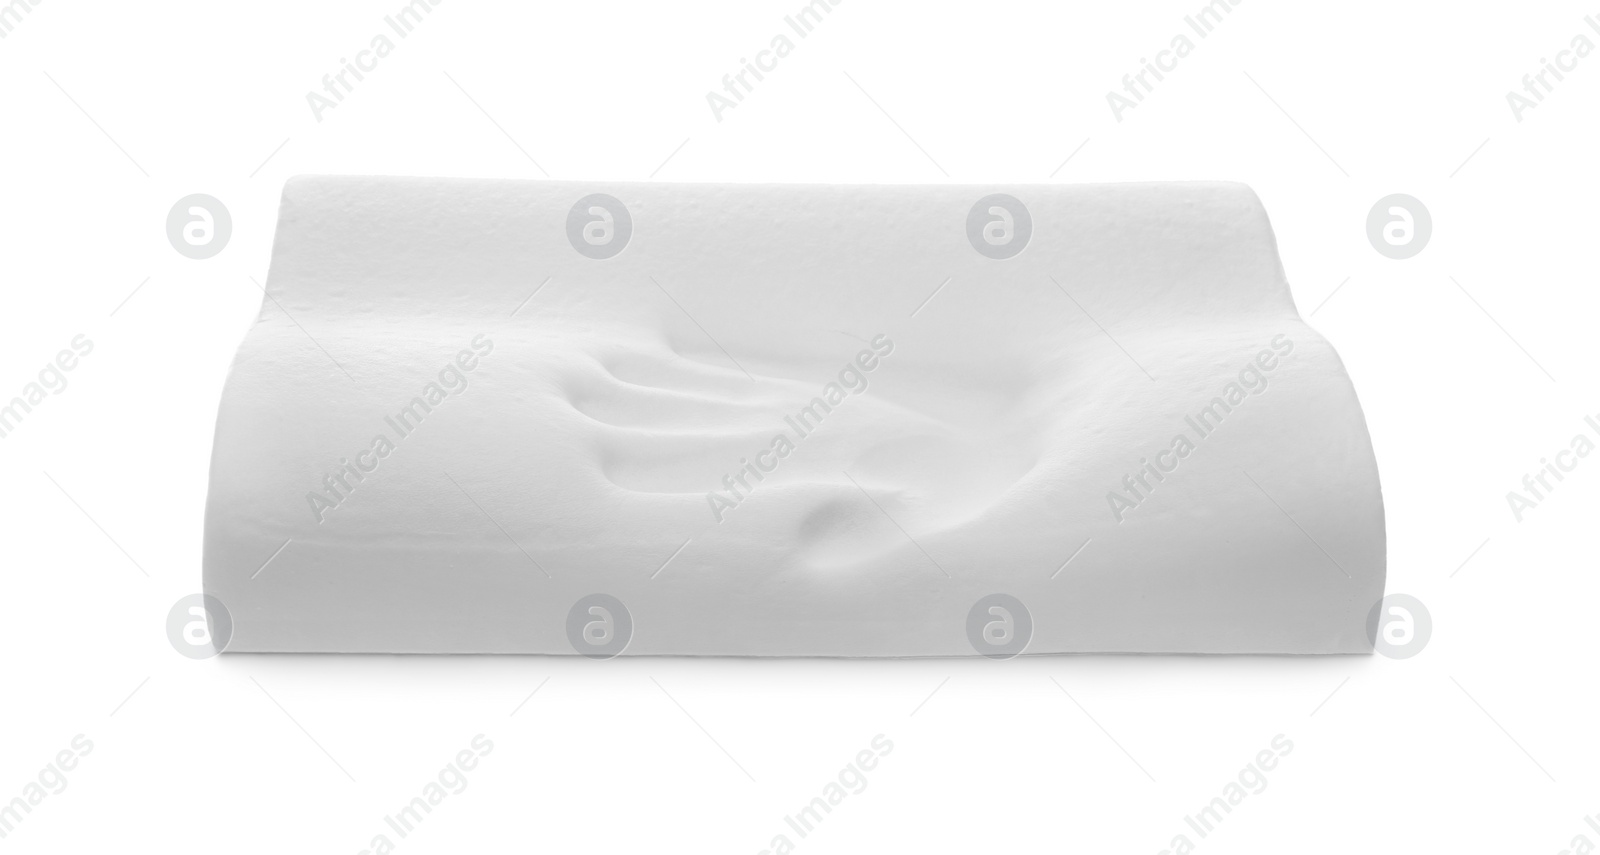 Photo of Orthopedic memory foam pillow with handprint isolated on white